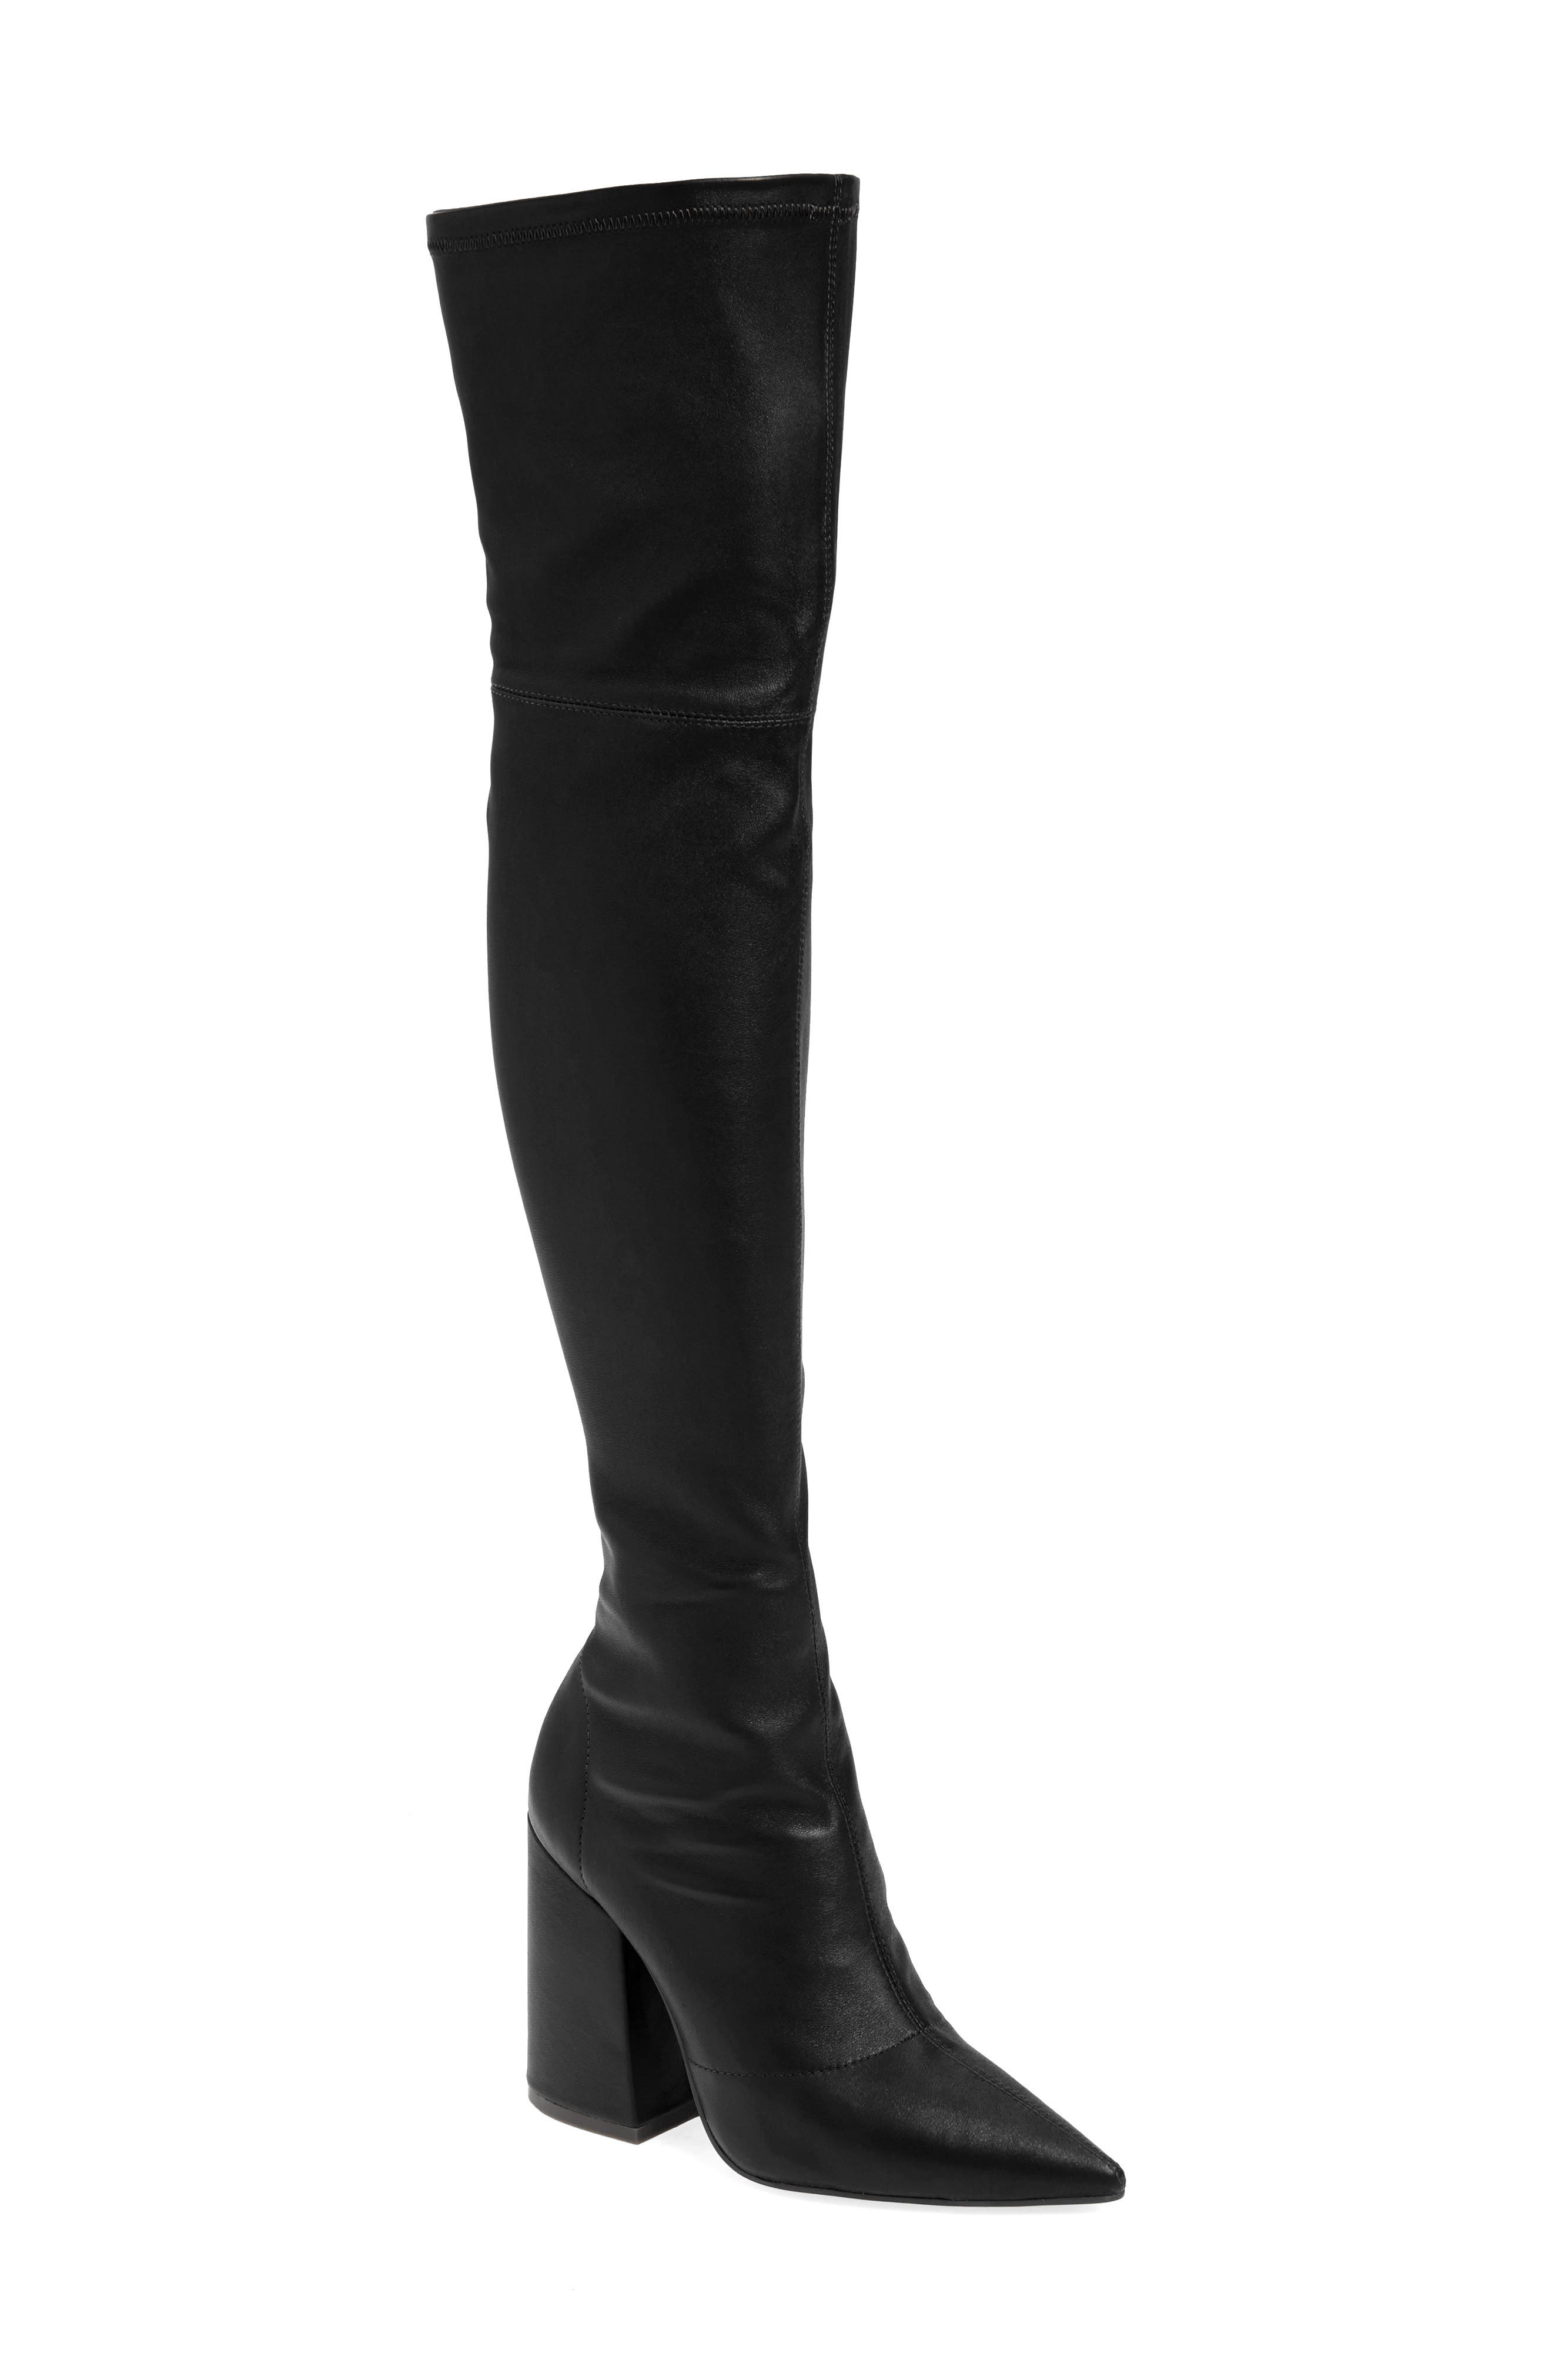 past knee boots